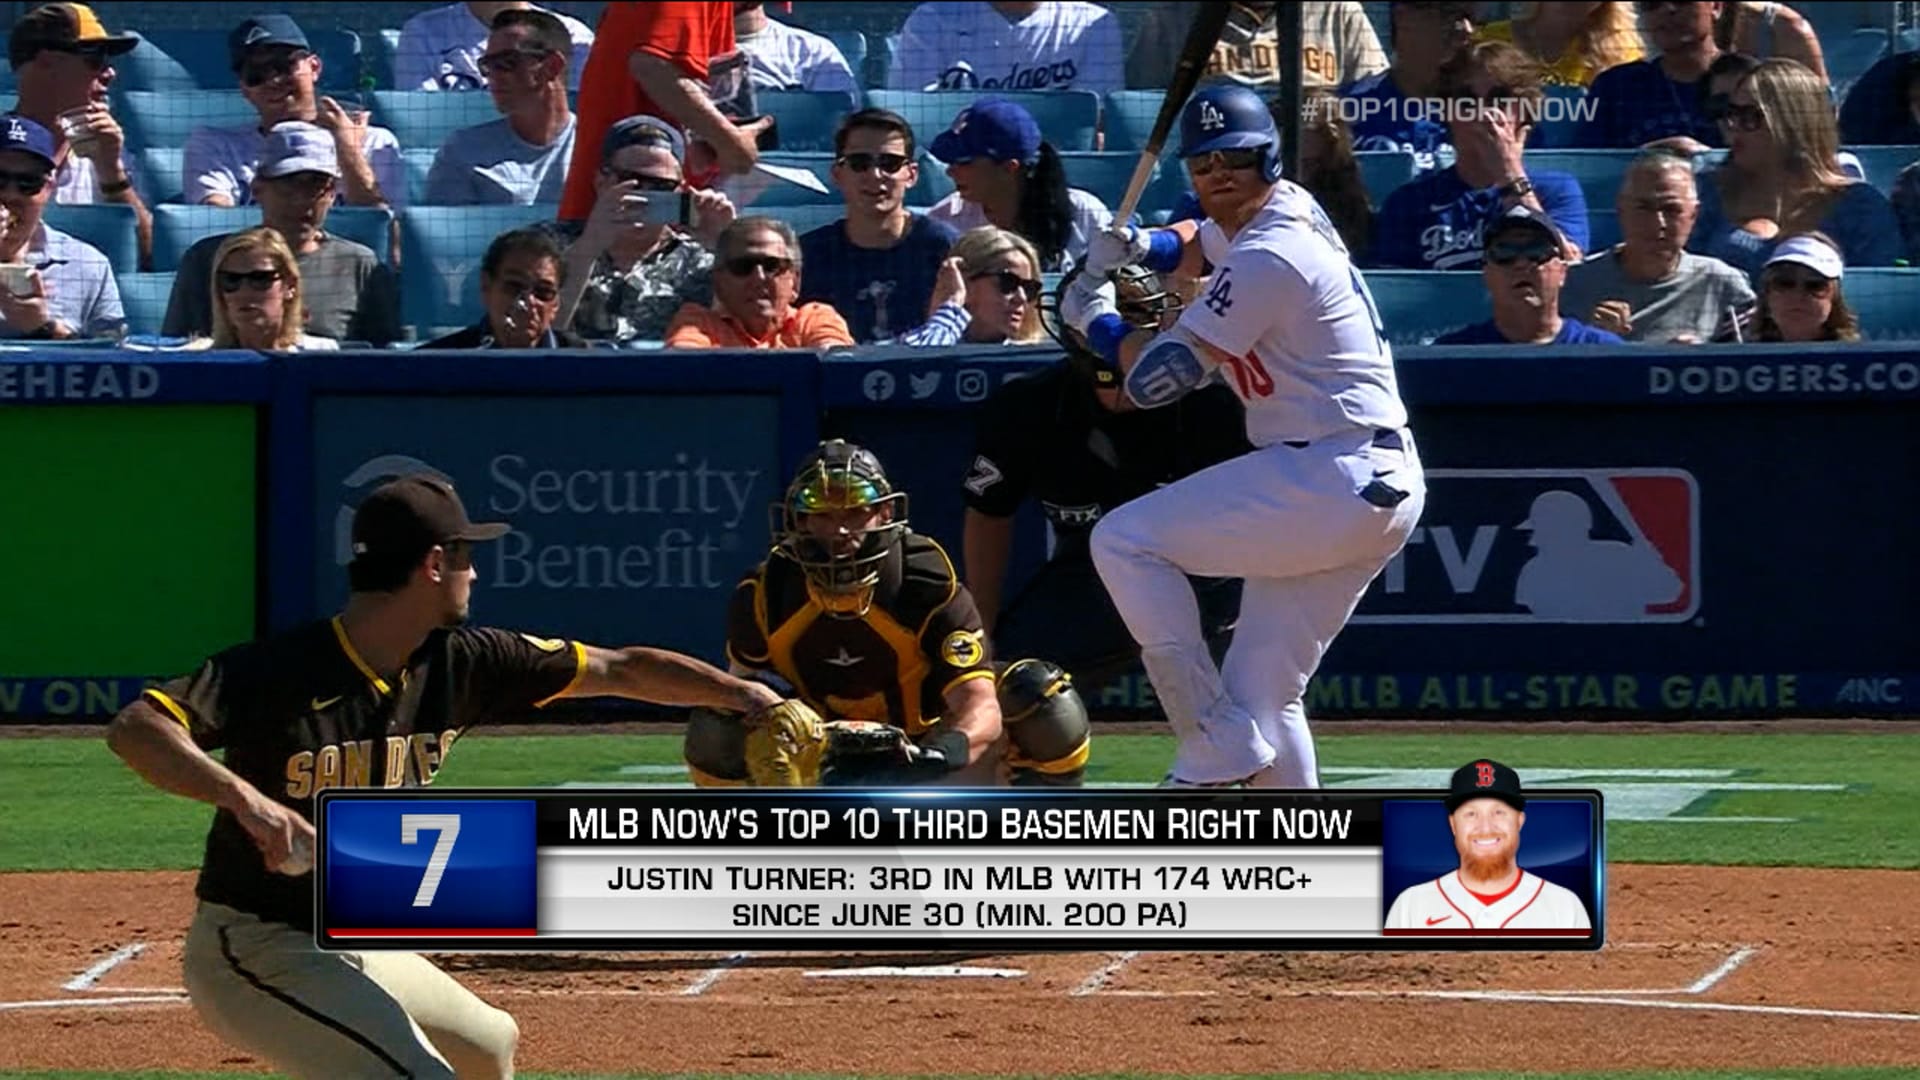 MLB Networks top 10 3rd basemen. KB is the most underrated player